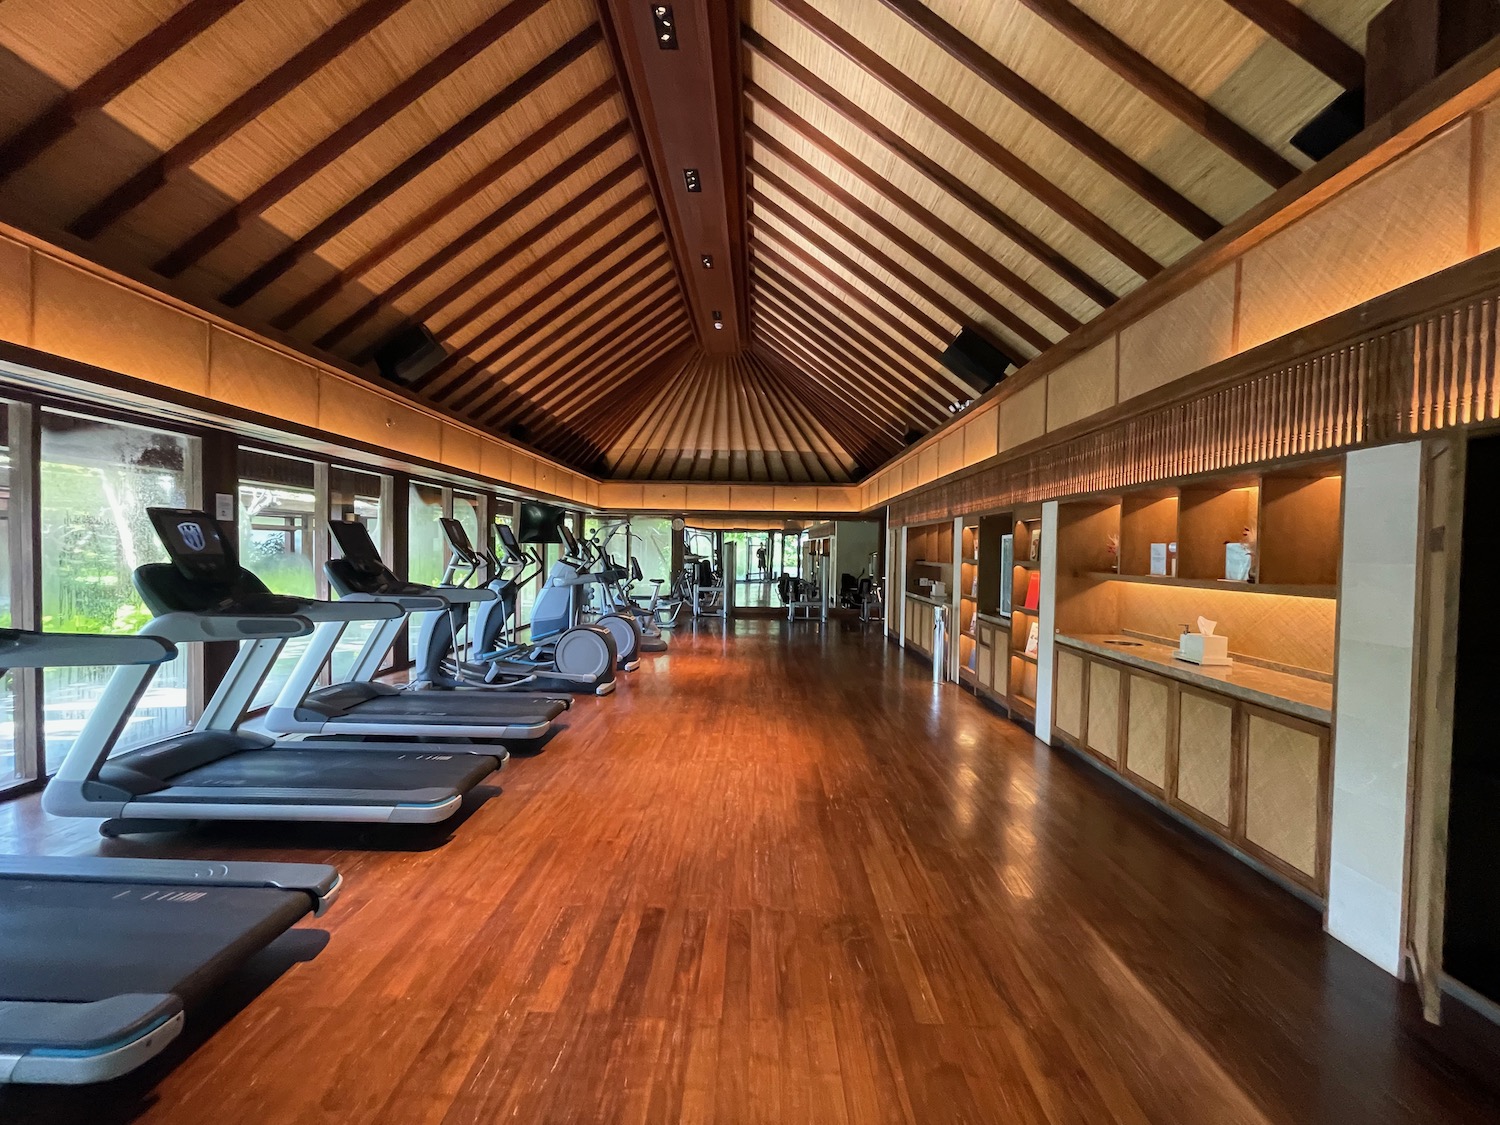 a room with treadmills and a wood floor